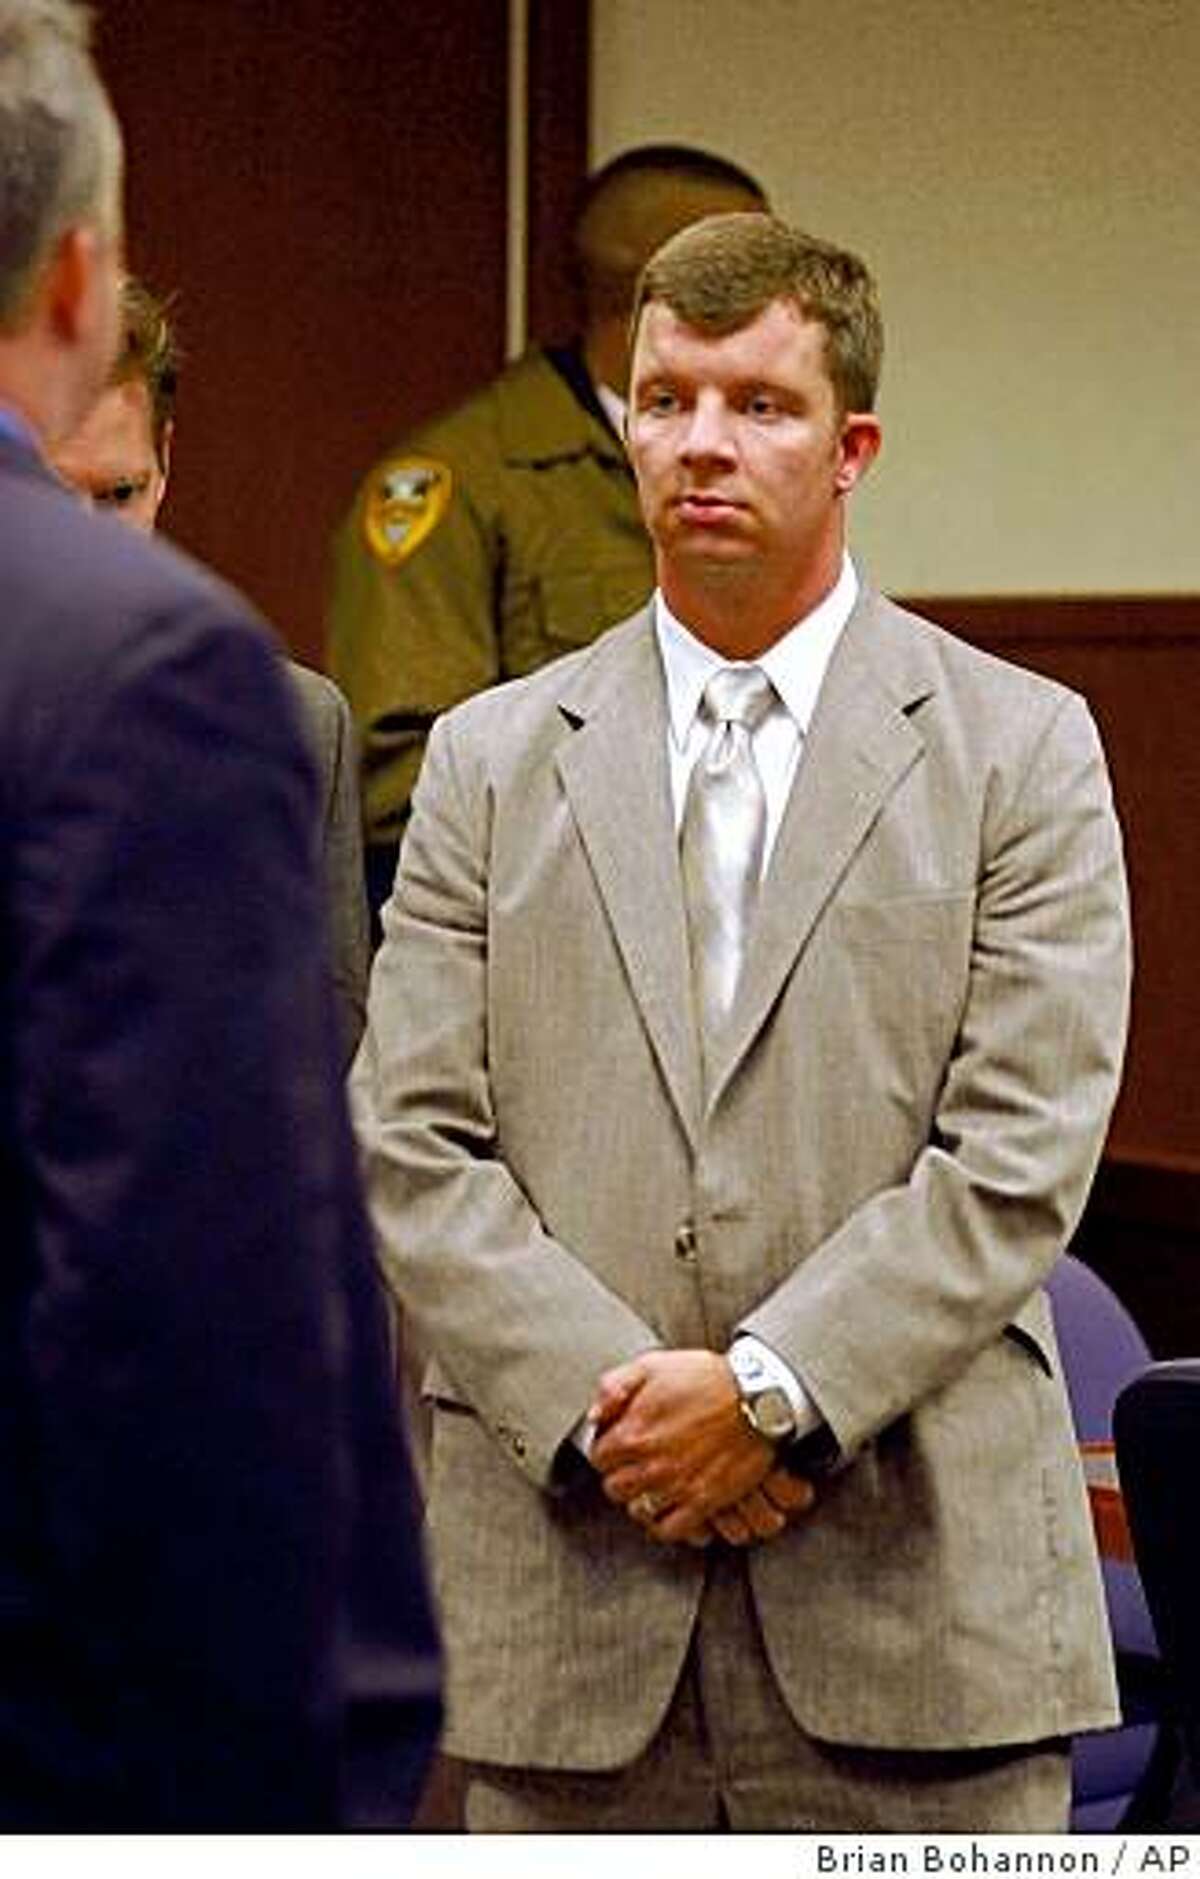 McKenzie Mattingly, a former Louisville, Ky., police detective, stands after being acquitted Wednesday, Sept. 29, 2004, of murder, manslaughter and reckless homicide in the fatal shooting in January of 19-year-old Michael Newby during an undercover drug buy. (AP Photo/Brian Bohannon)